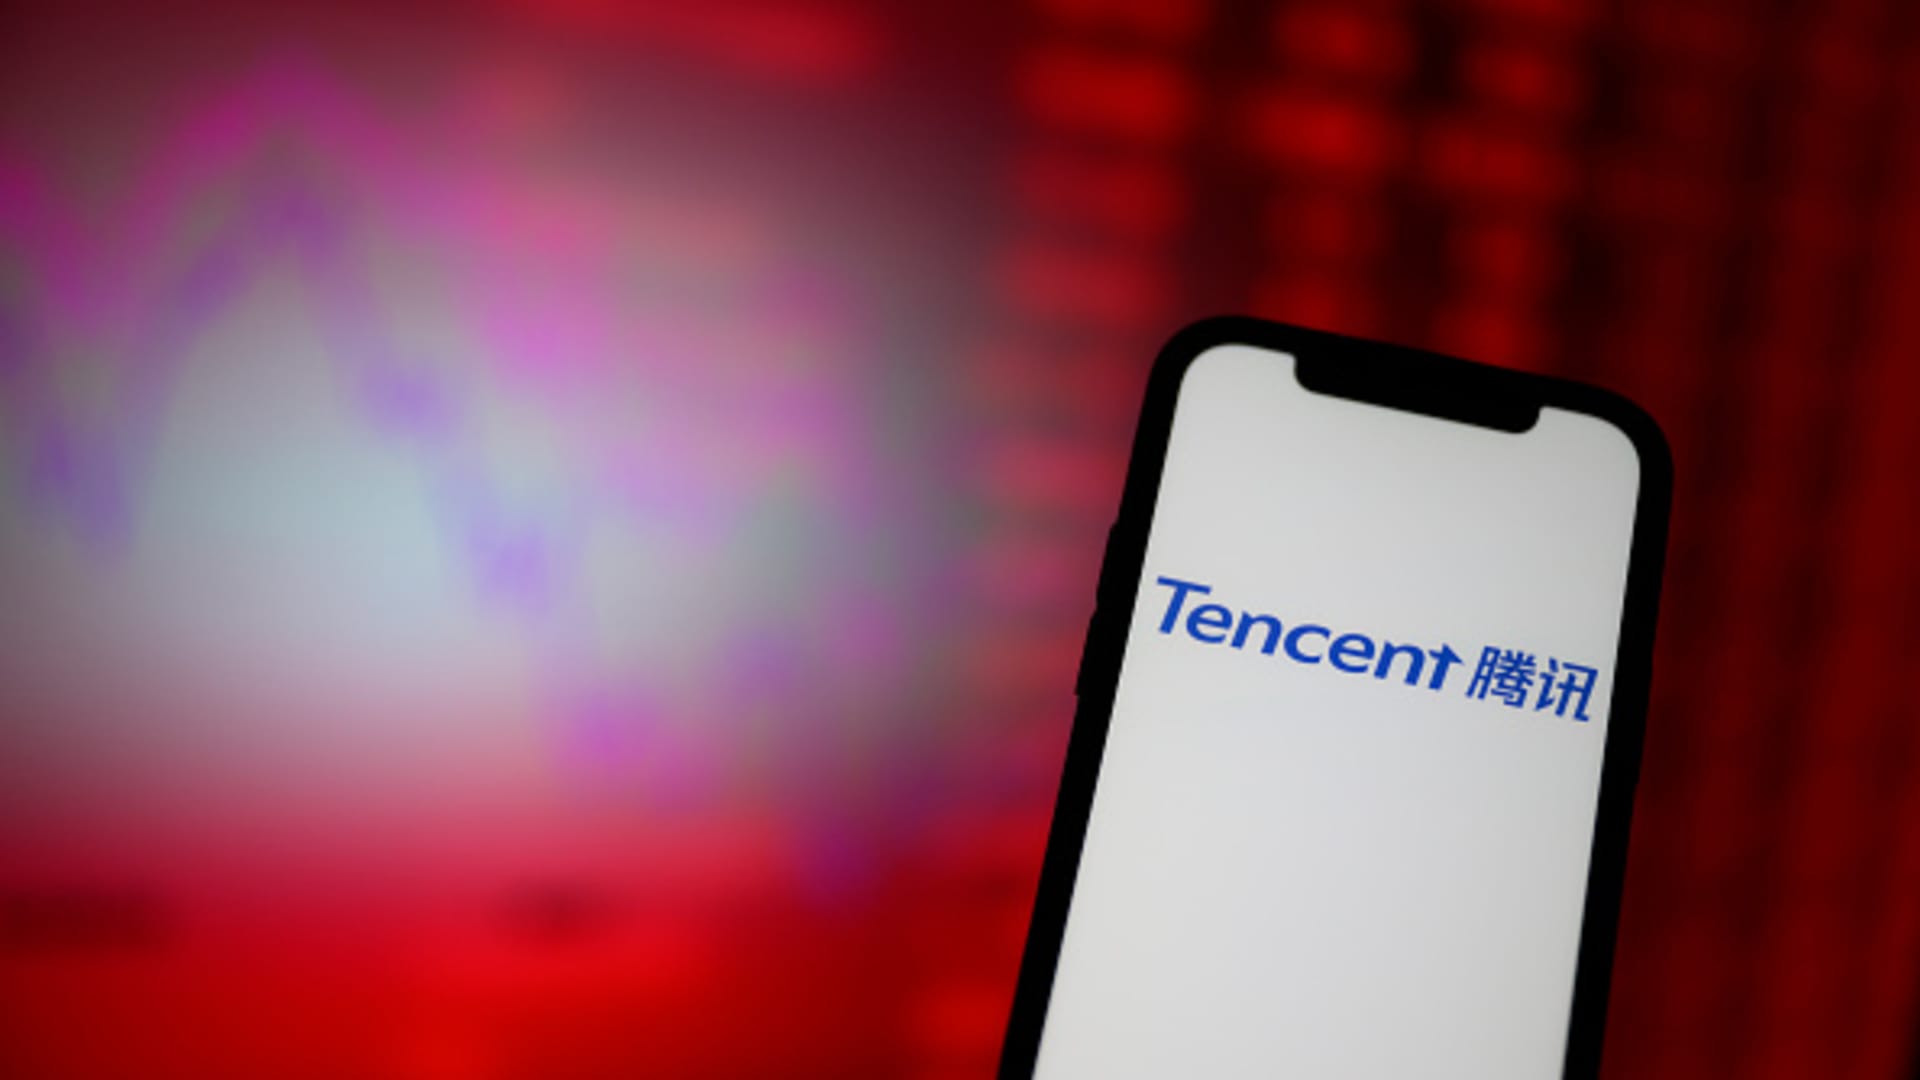 China’s Tencent posts 11% jump in quarterly revenue — the fastest growth in more than a year